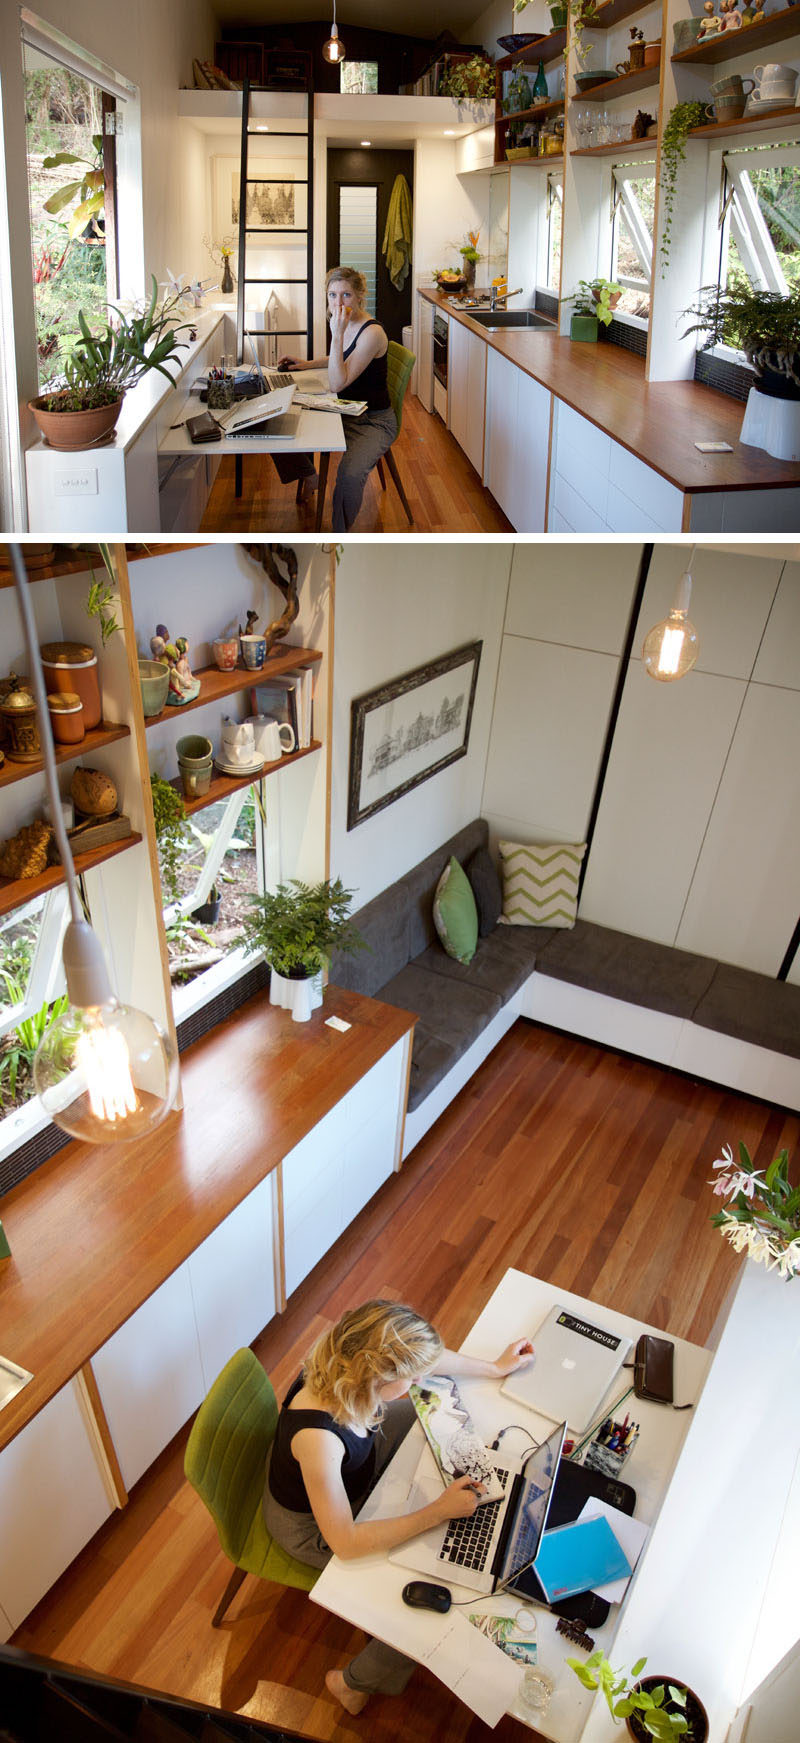 This custom designed tiny house has a small deck, a comfortable lounge, a kitchen with a fold out table, a retractable bed, a relaxing loft area.